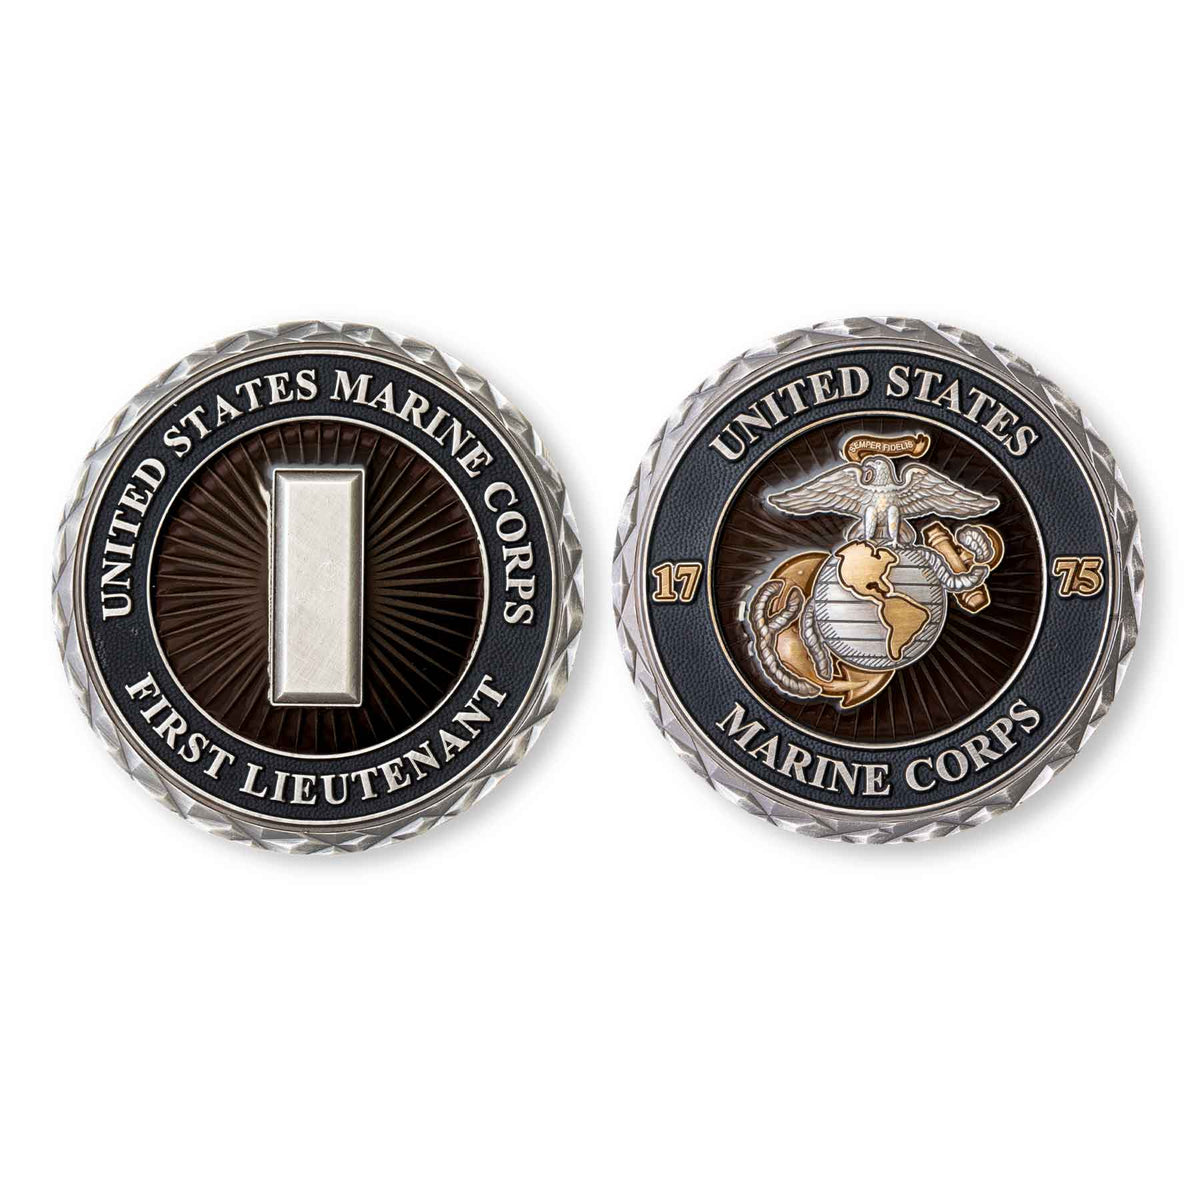 U.S. Army Lt. Colonel Coin – Ranger Coin Store